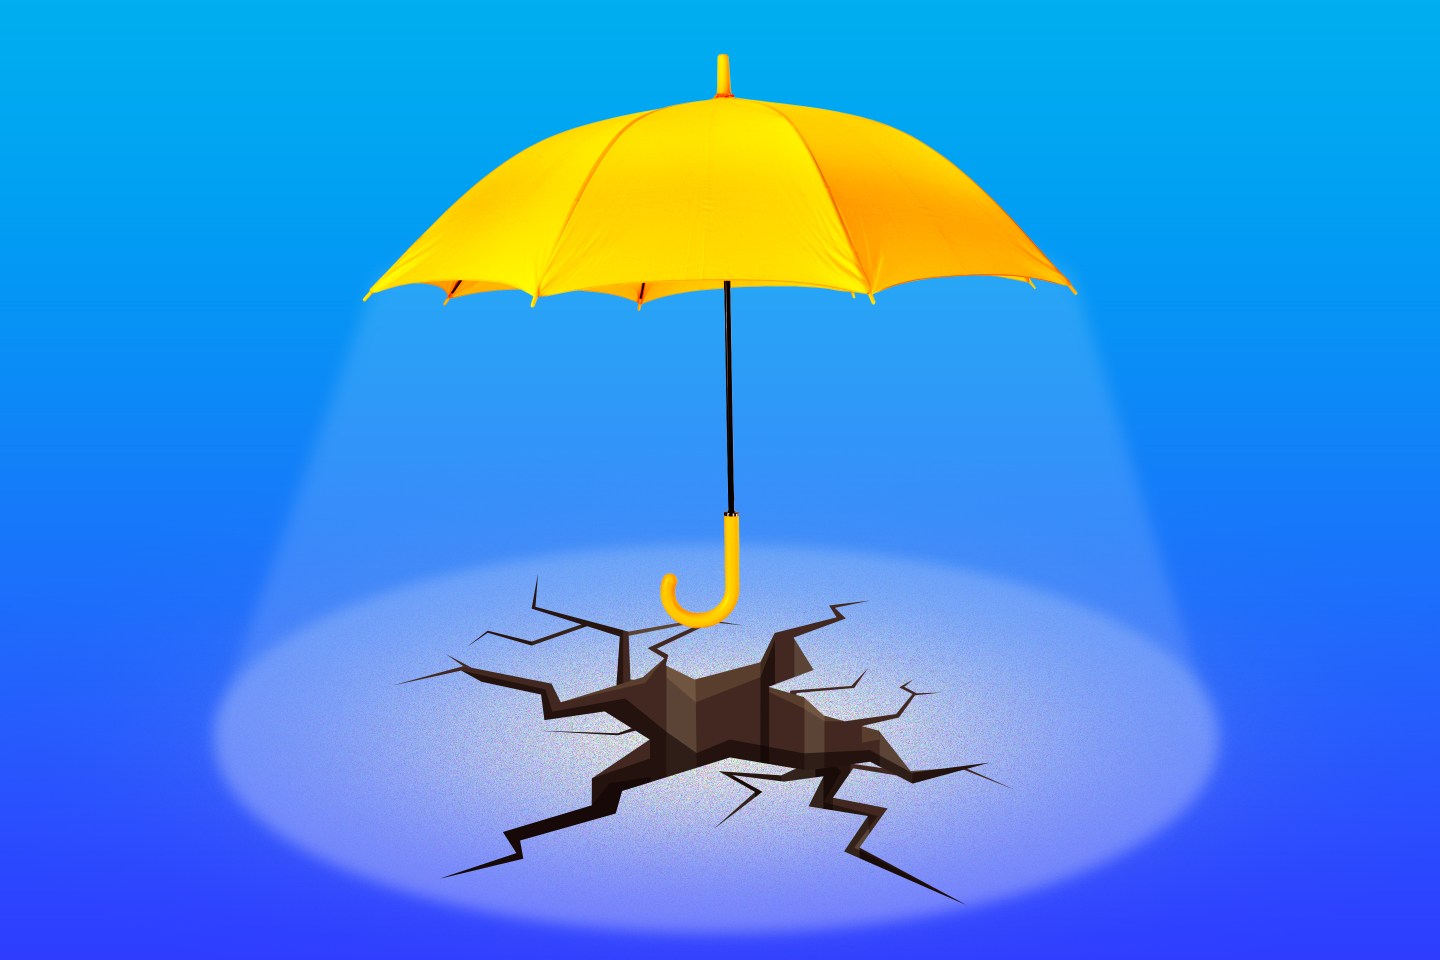 Photo illustration of an umbrella casting a spotlight over a large crack in the ground.